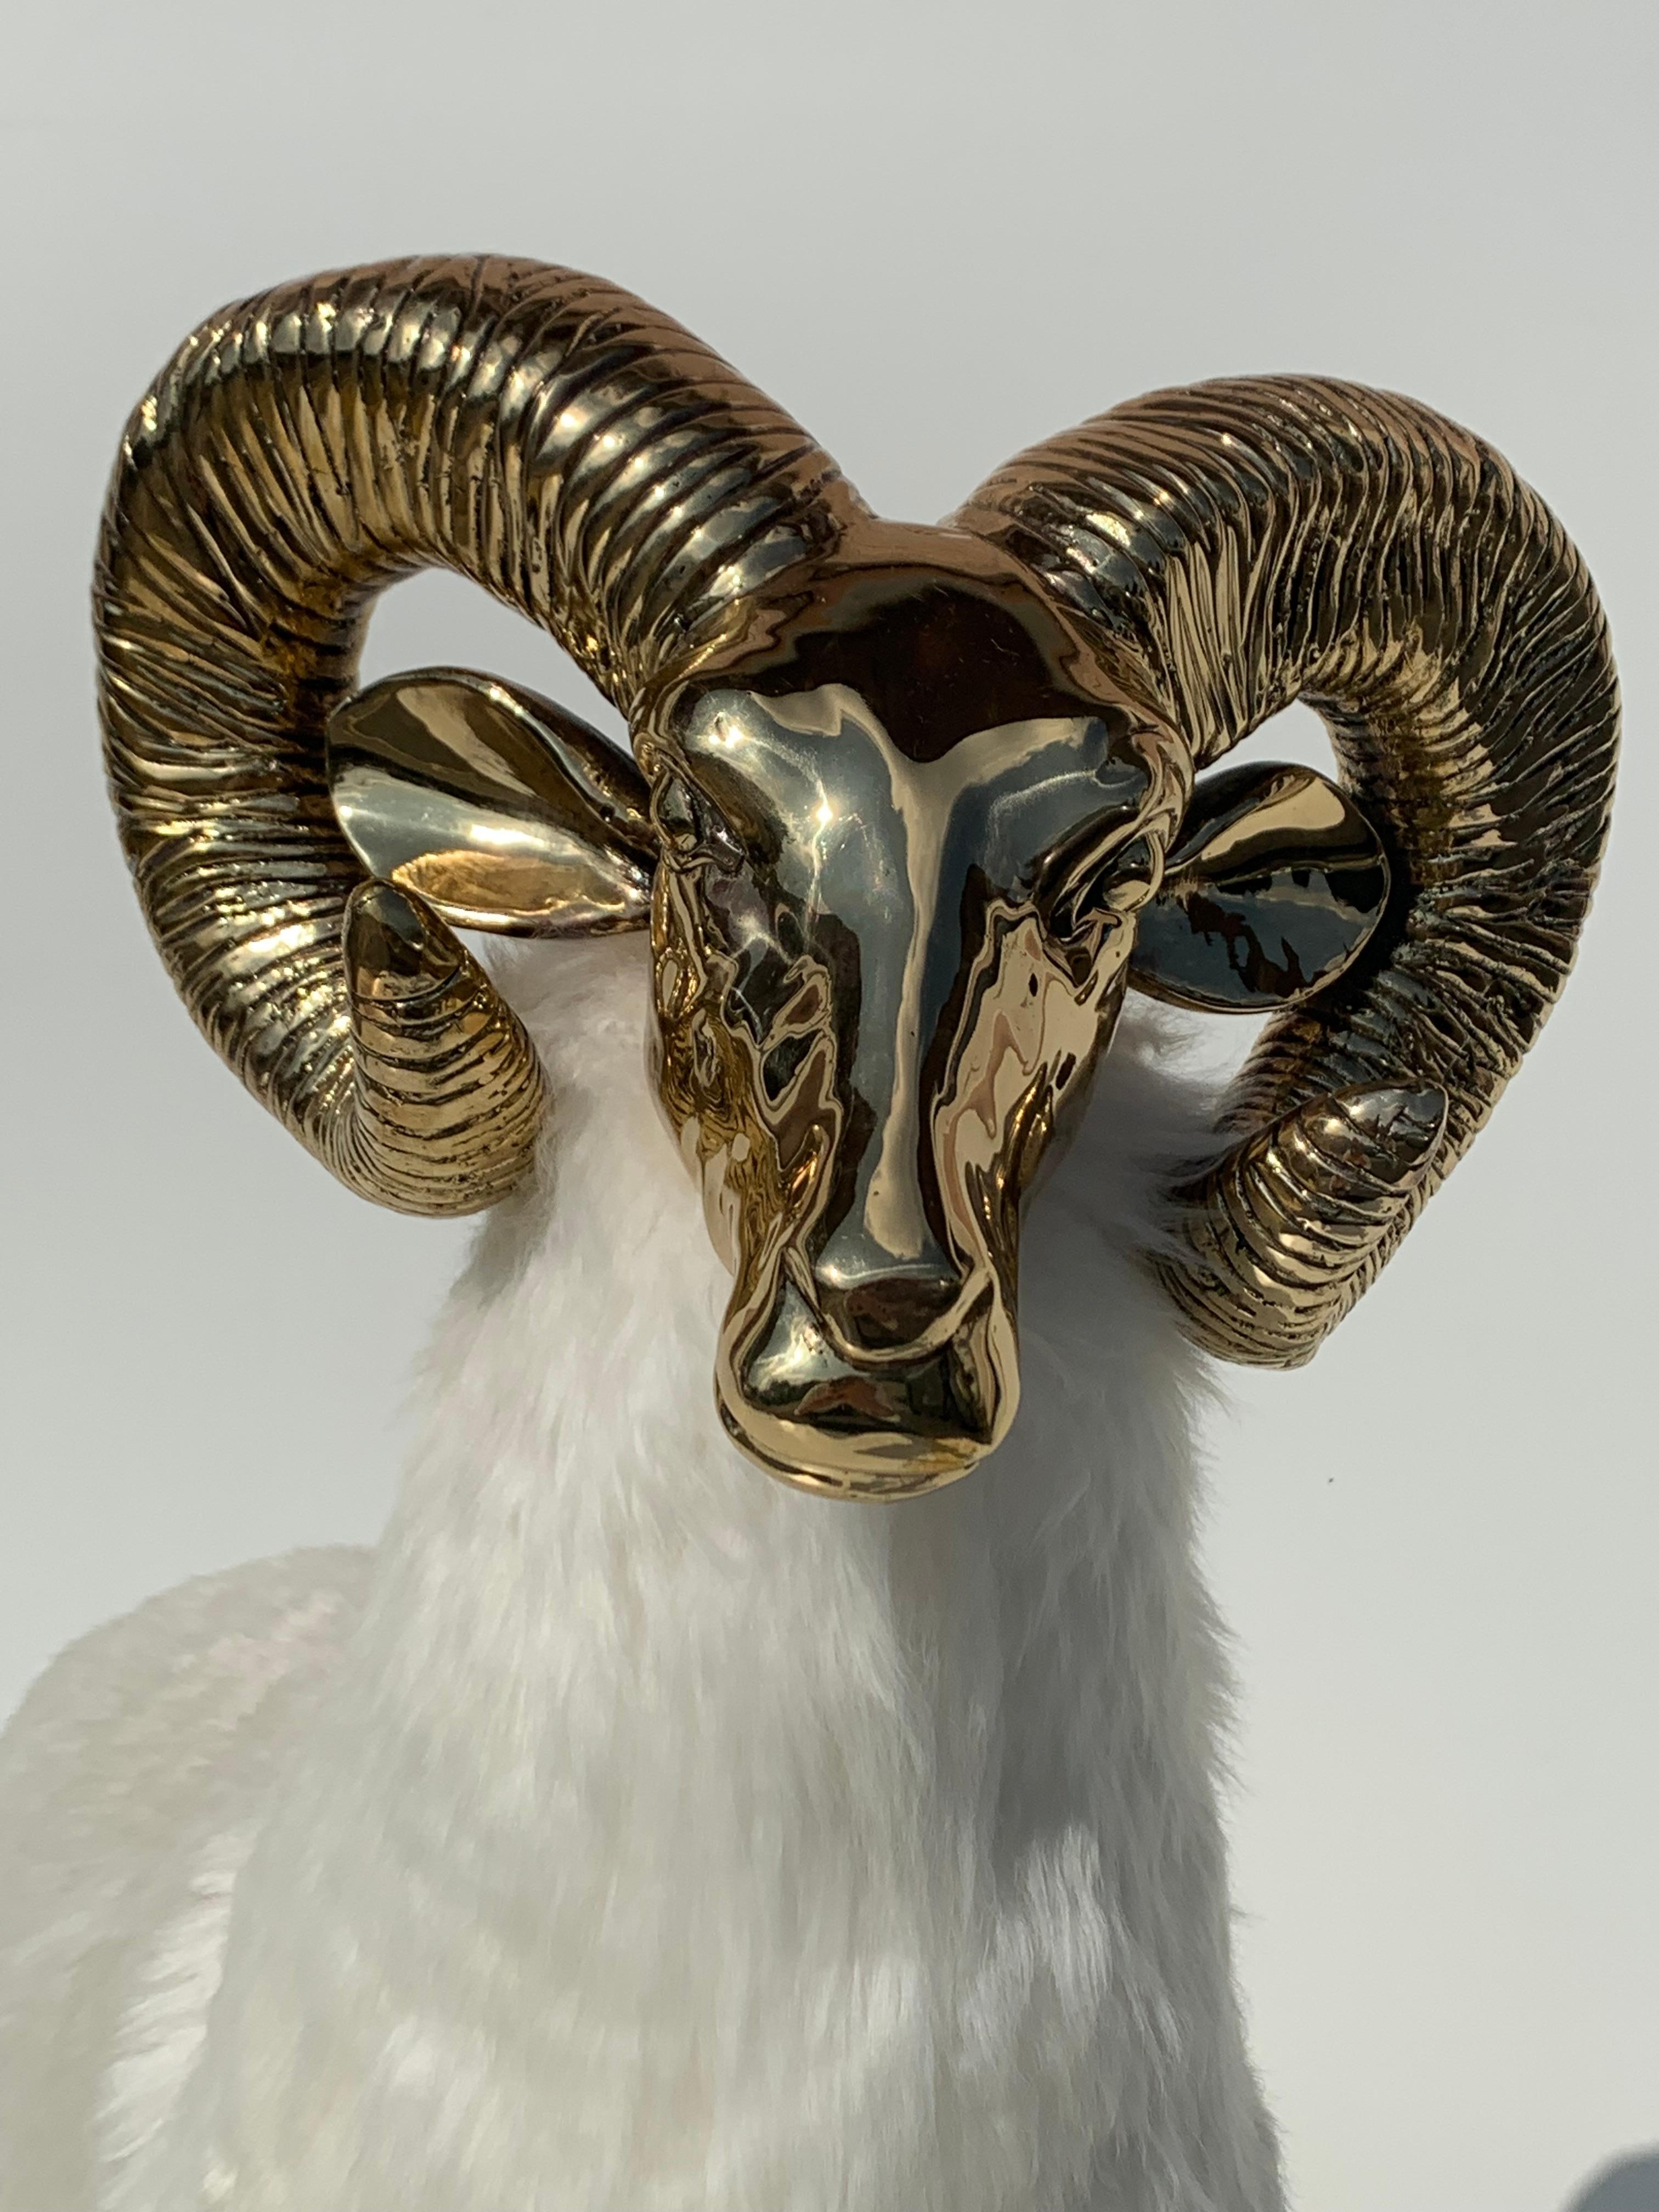 Late 20th Century Polished Brass Ram or Sheep Sculpture